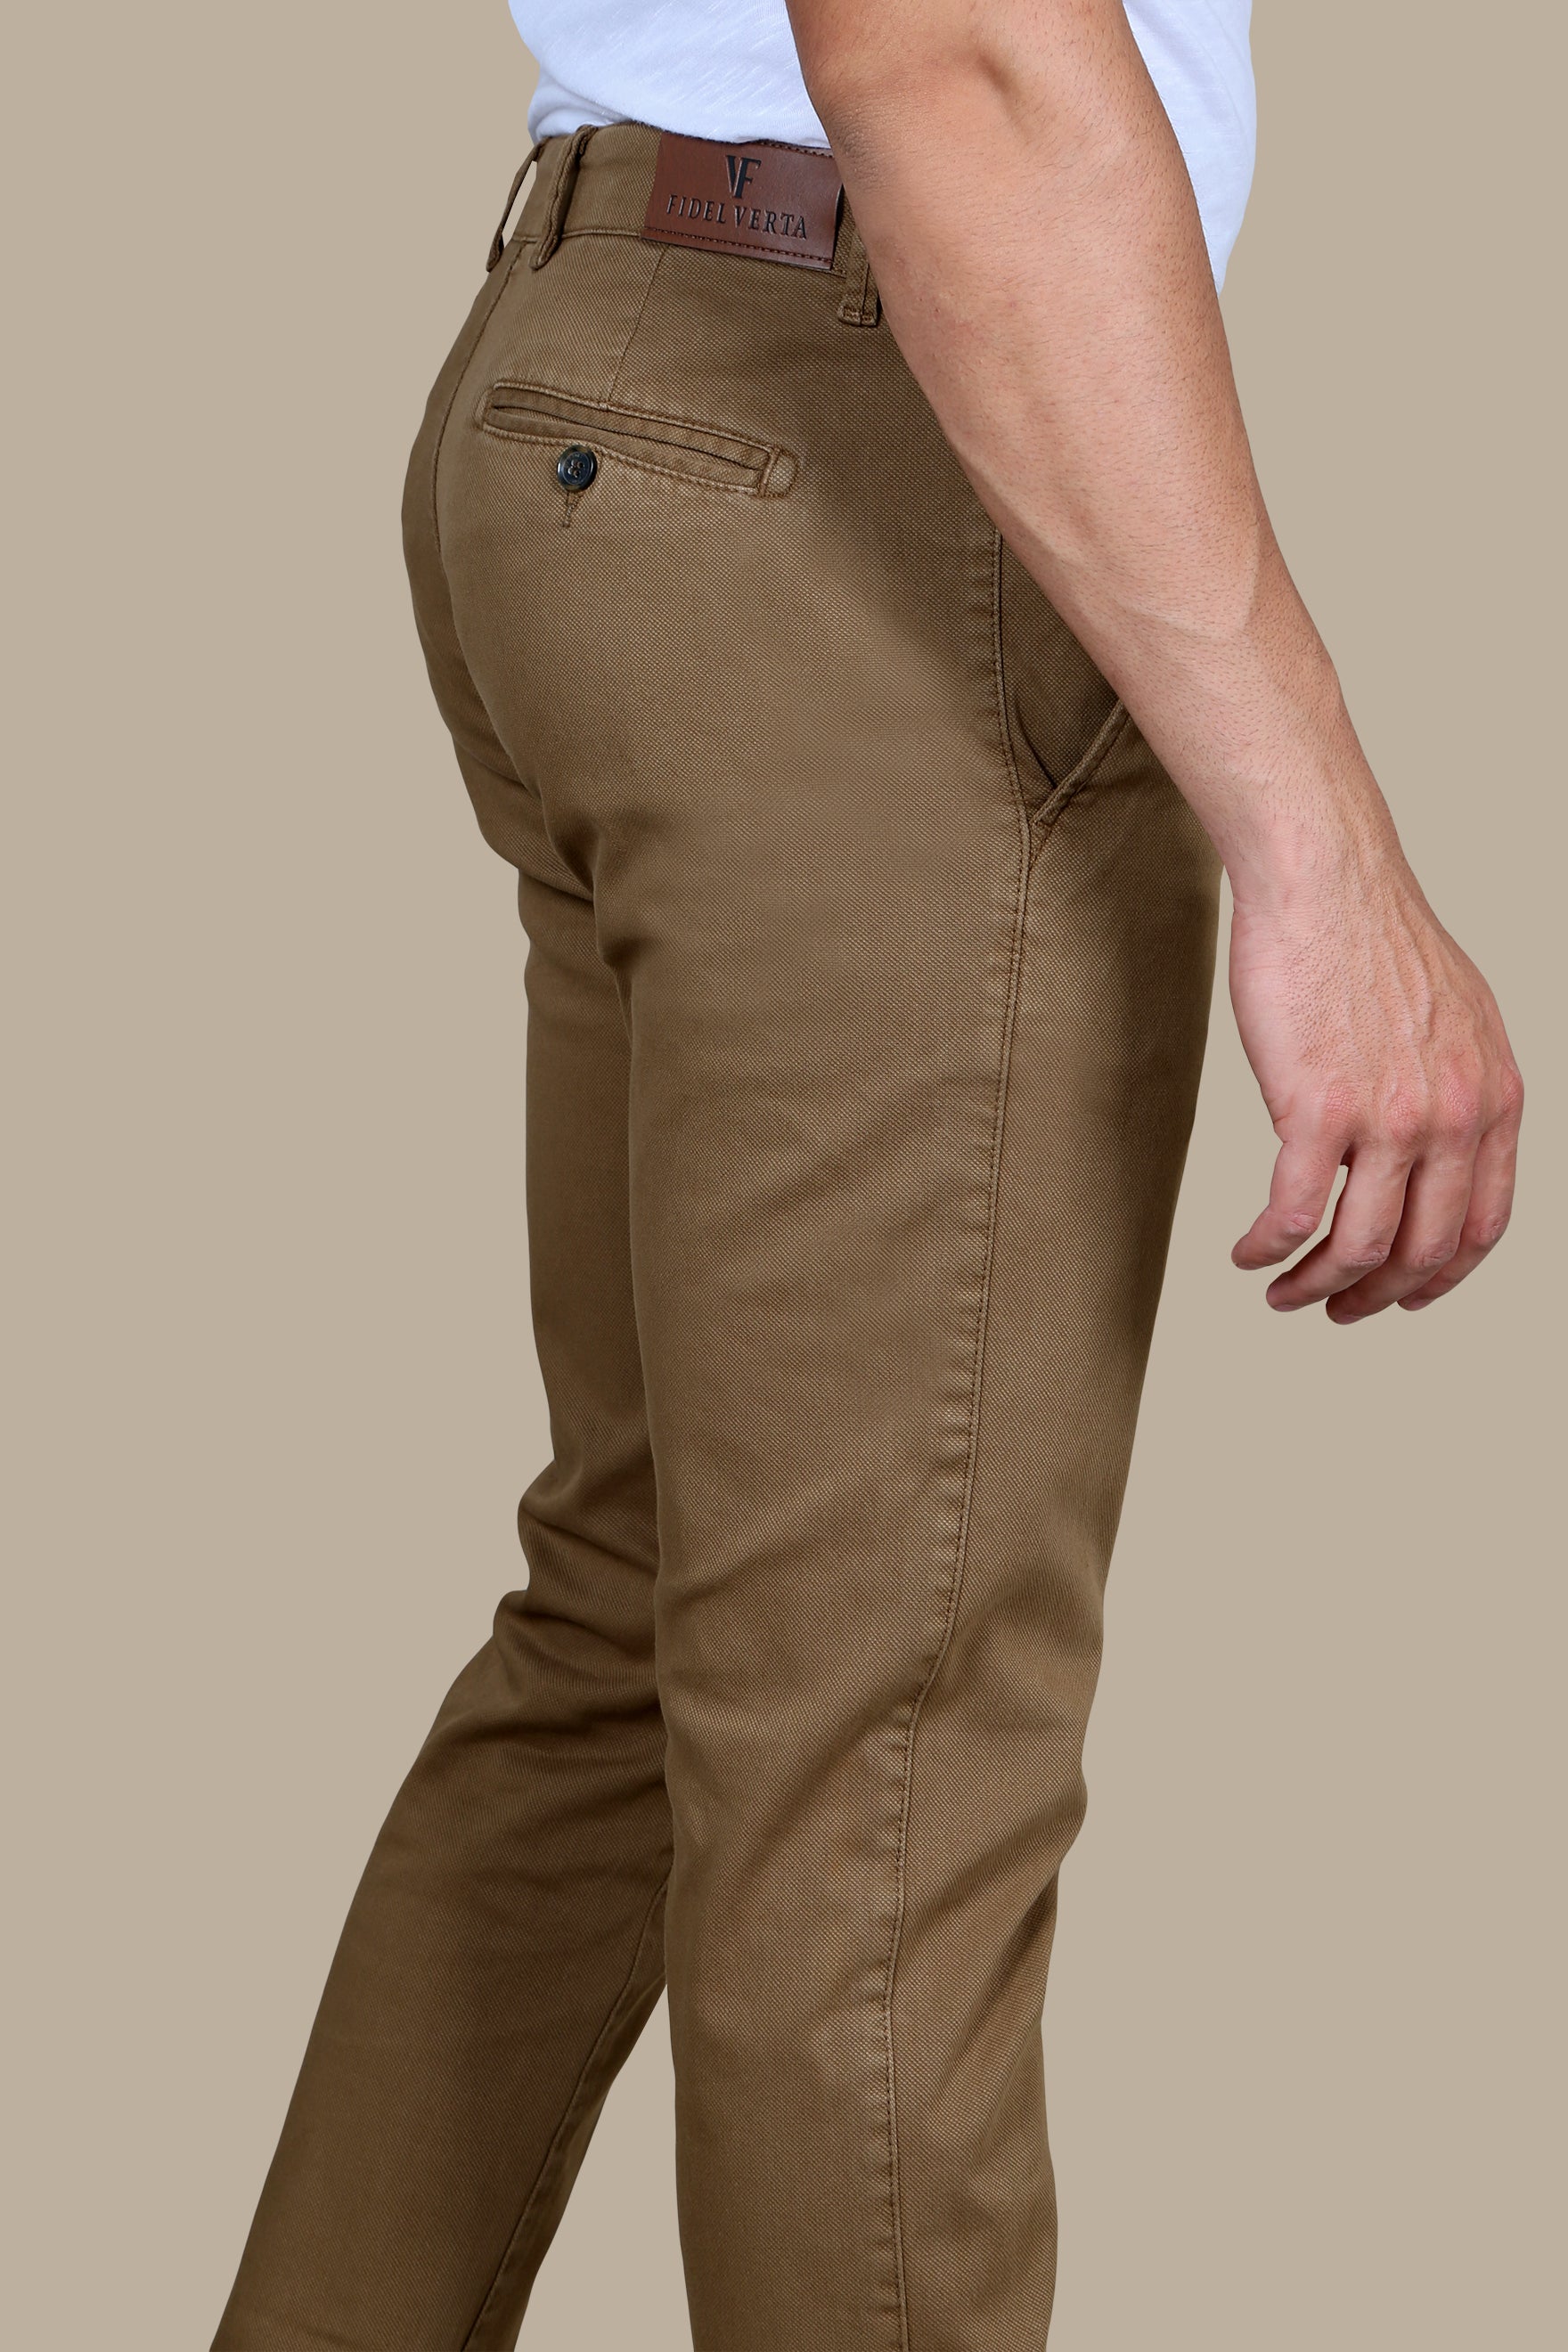 Brown Oxford Chino Slim Fit